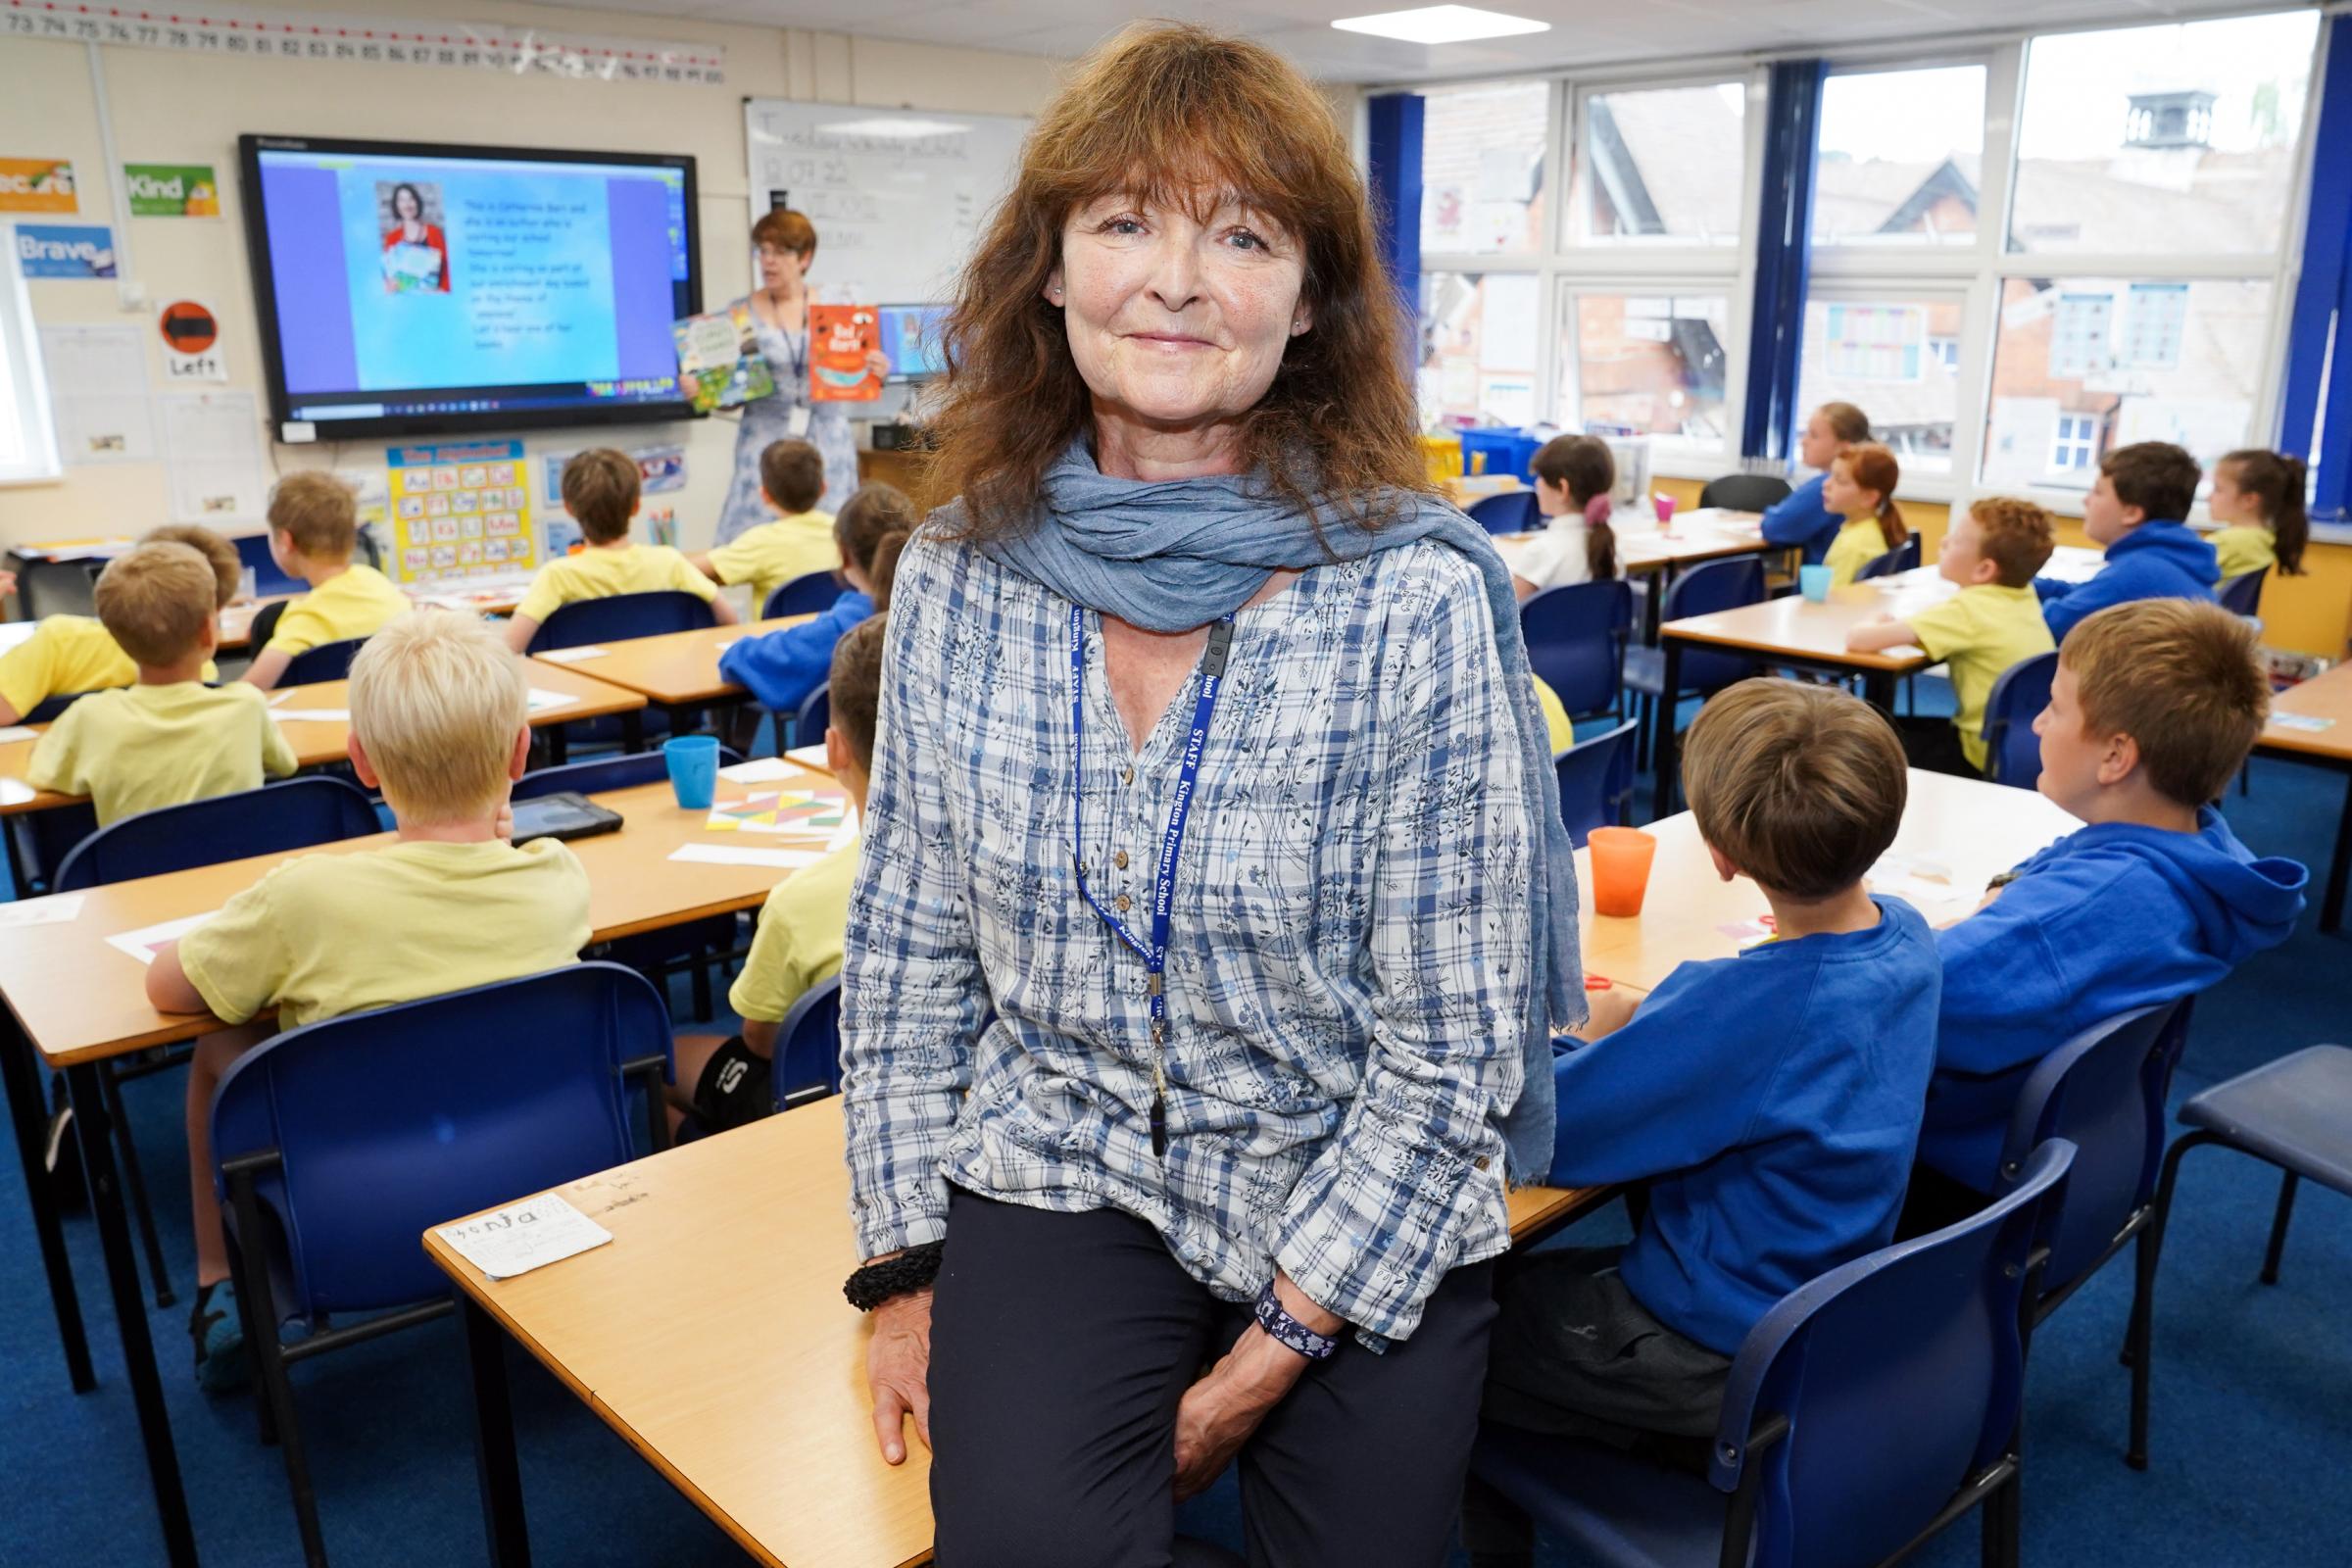 Headteacher at Kington Primary School, Anne Phillips is retiring after 22 years.